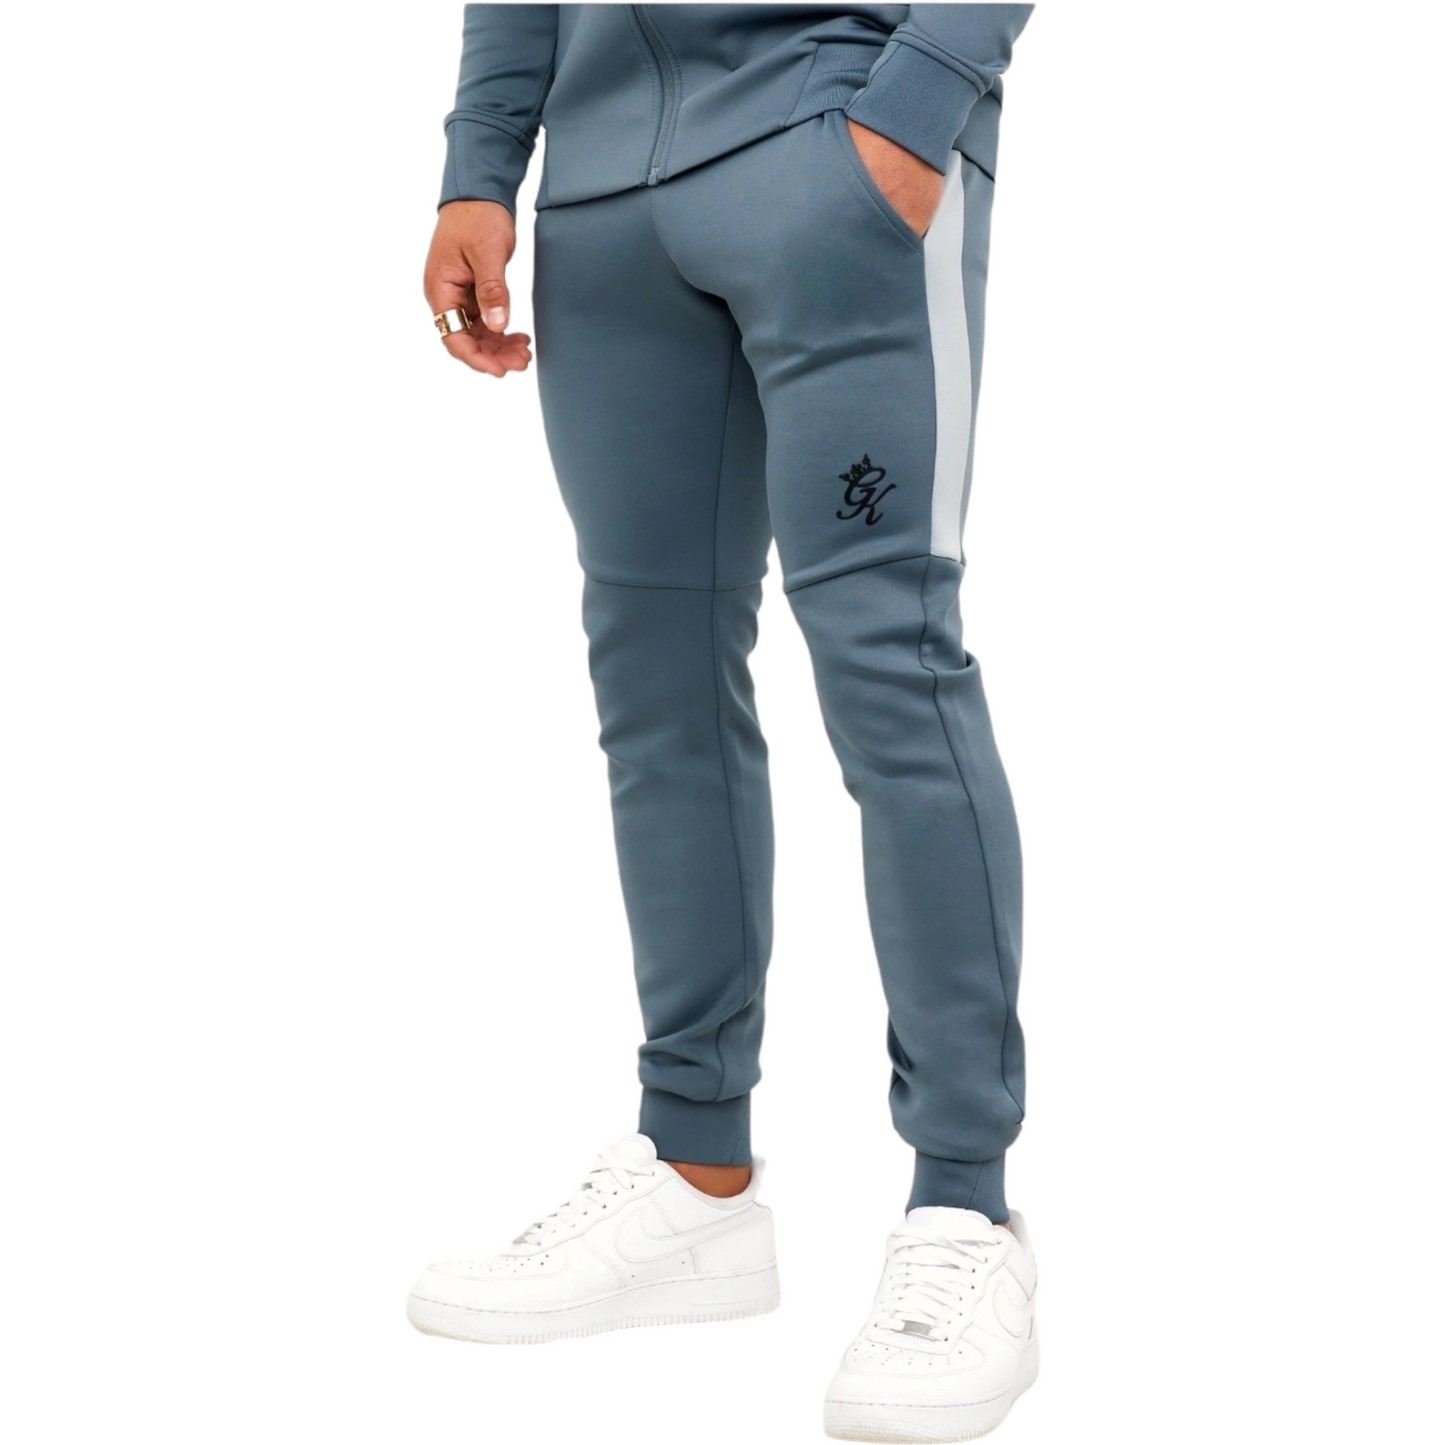 GYM KING PLUS POLY TRACKSUIT BOTTOMS - STORMY GREY